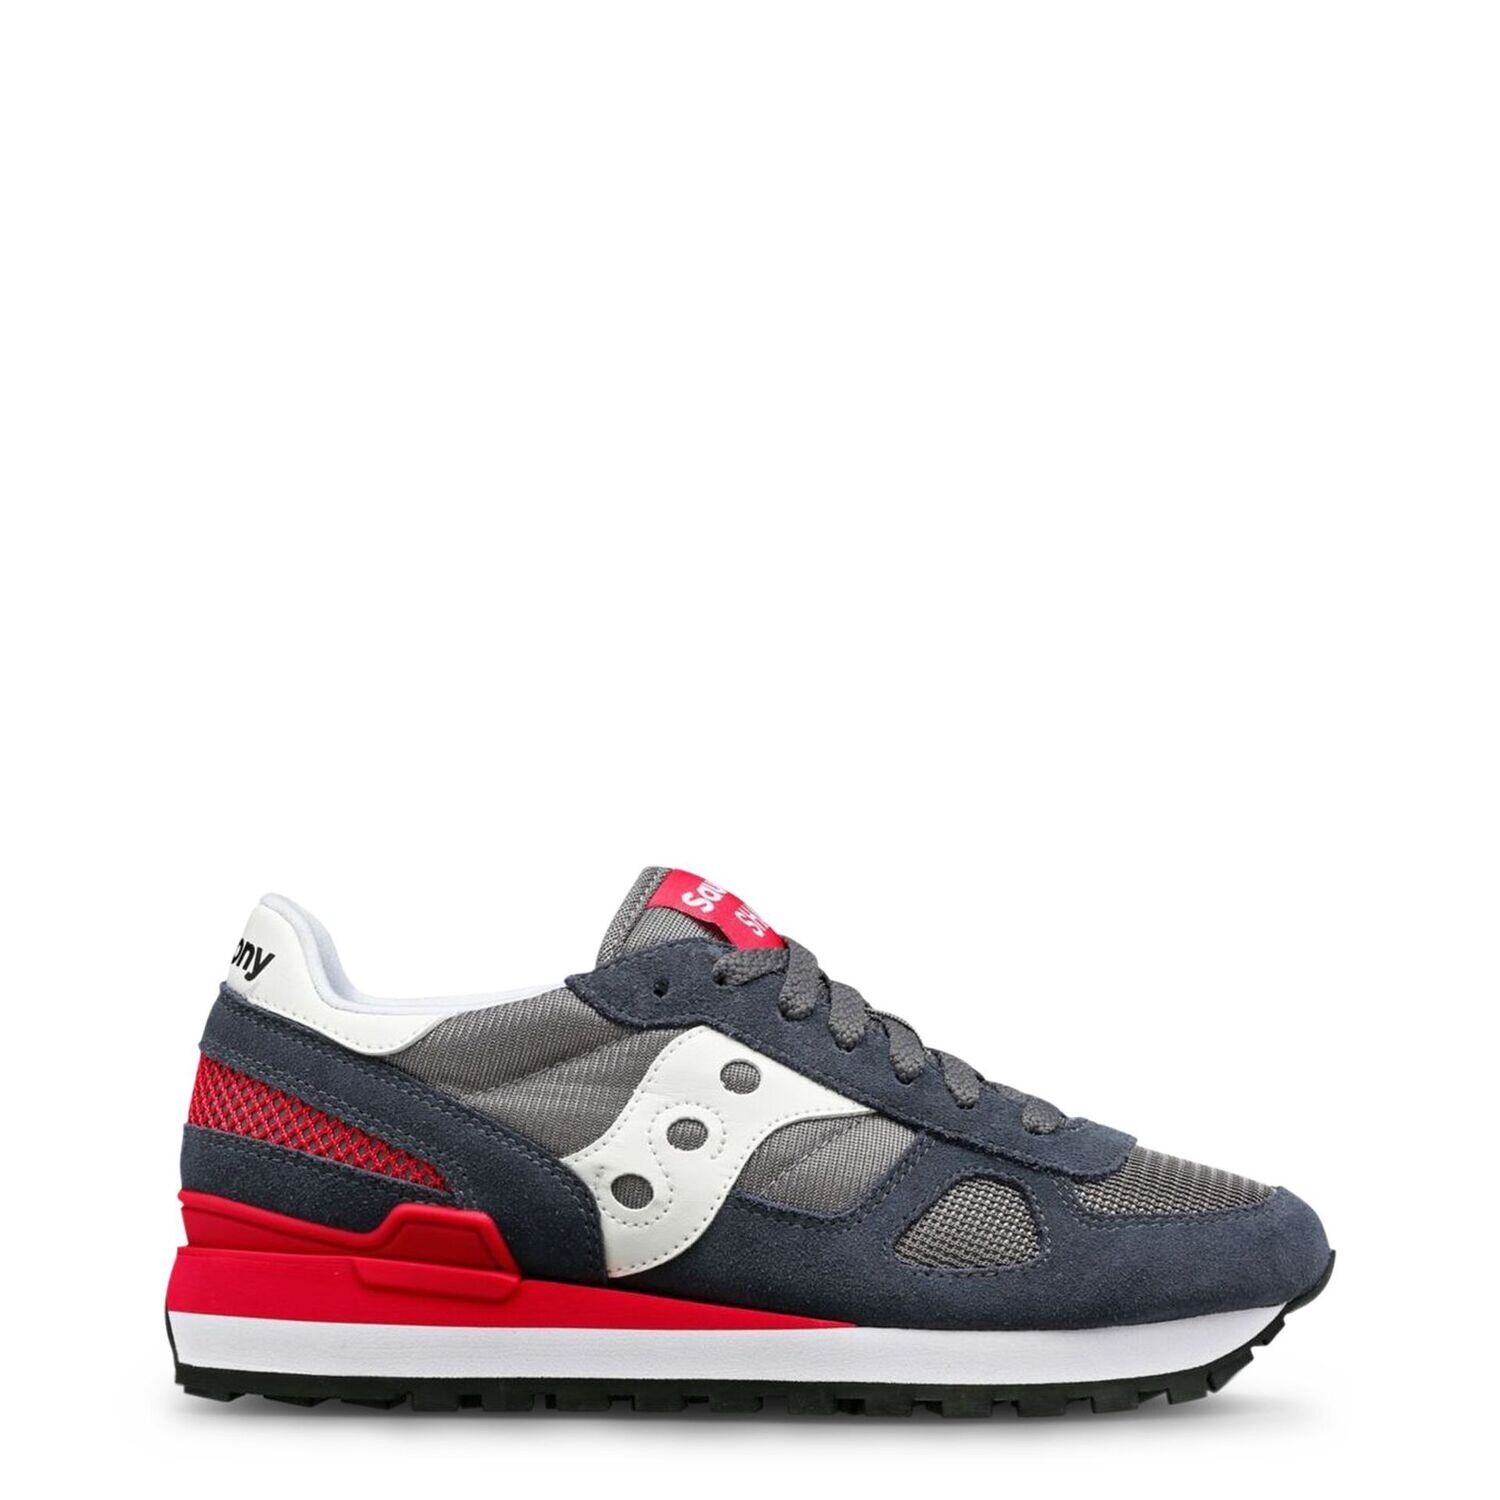 Saucony Shadow Grey and Red Trainers